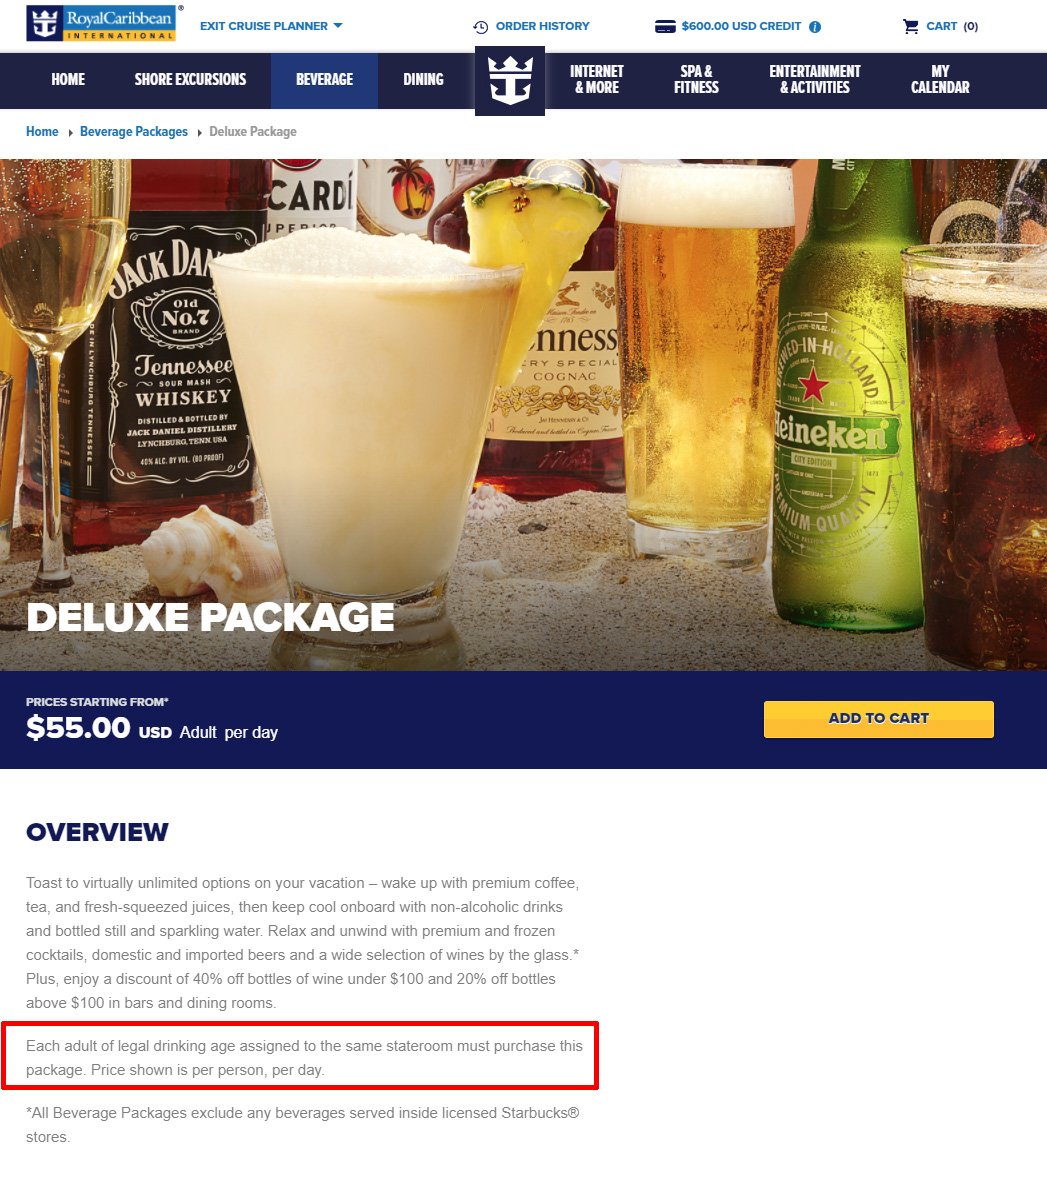 Royal Caribbean requiring all adults in same stateroom to purchase ...